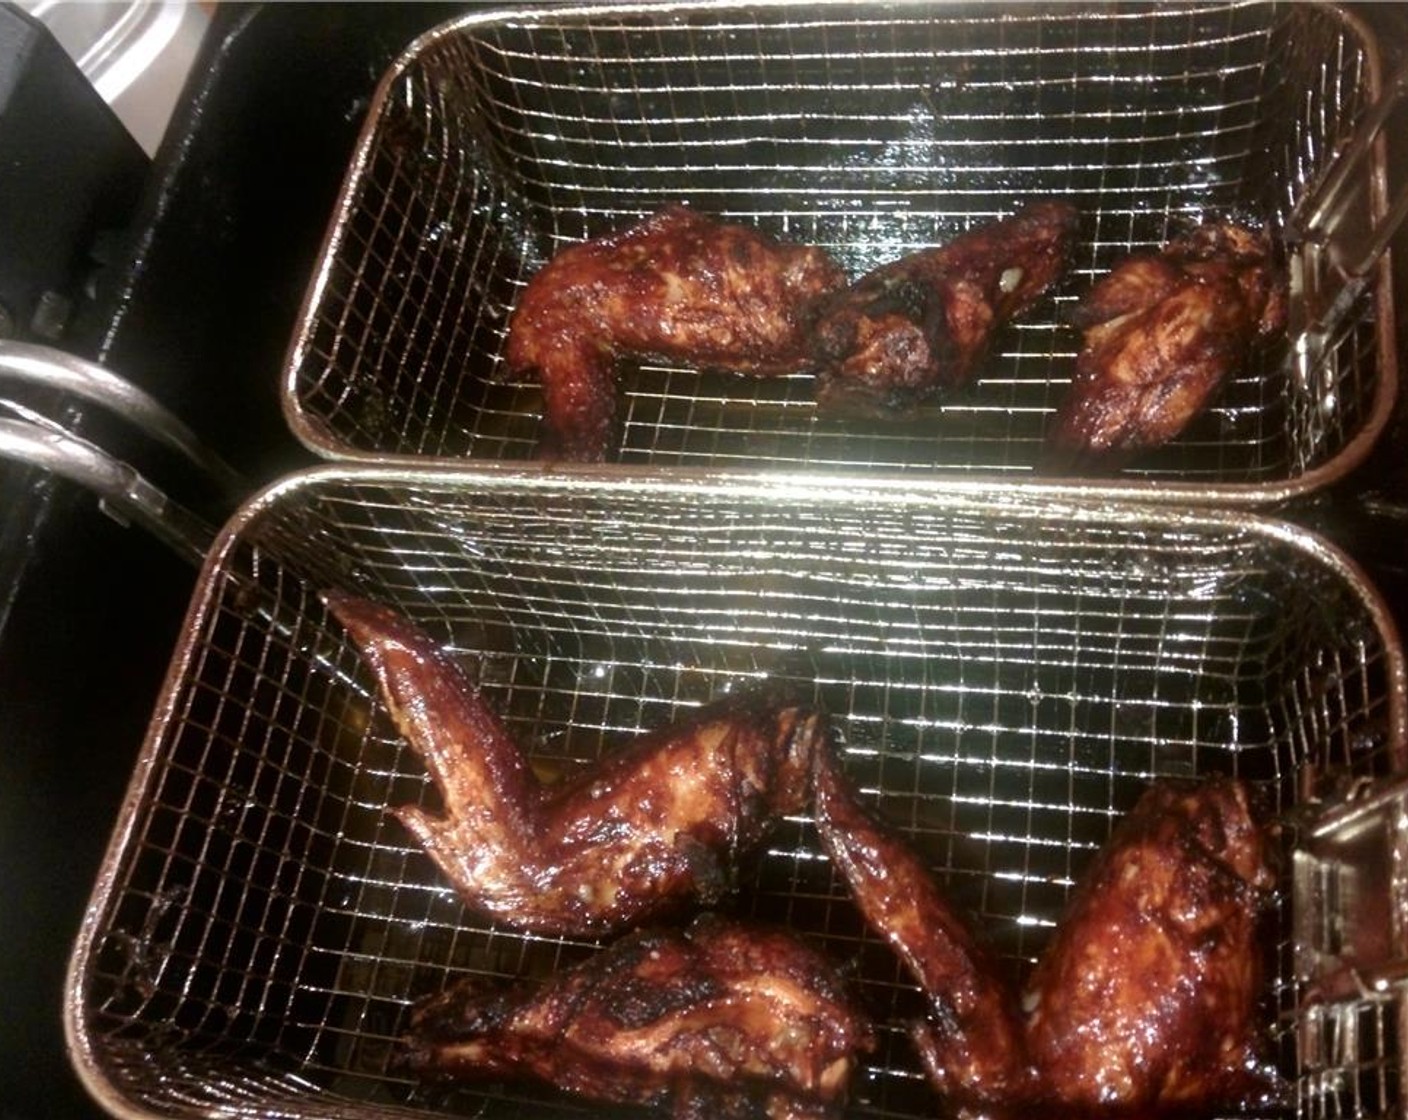 step 9 Cook the wings in small batches and make adjustments to the temperature as you see fit, just be sure to cook them to an internal temperature of 165 degrees F (75 degrees C).